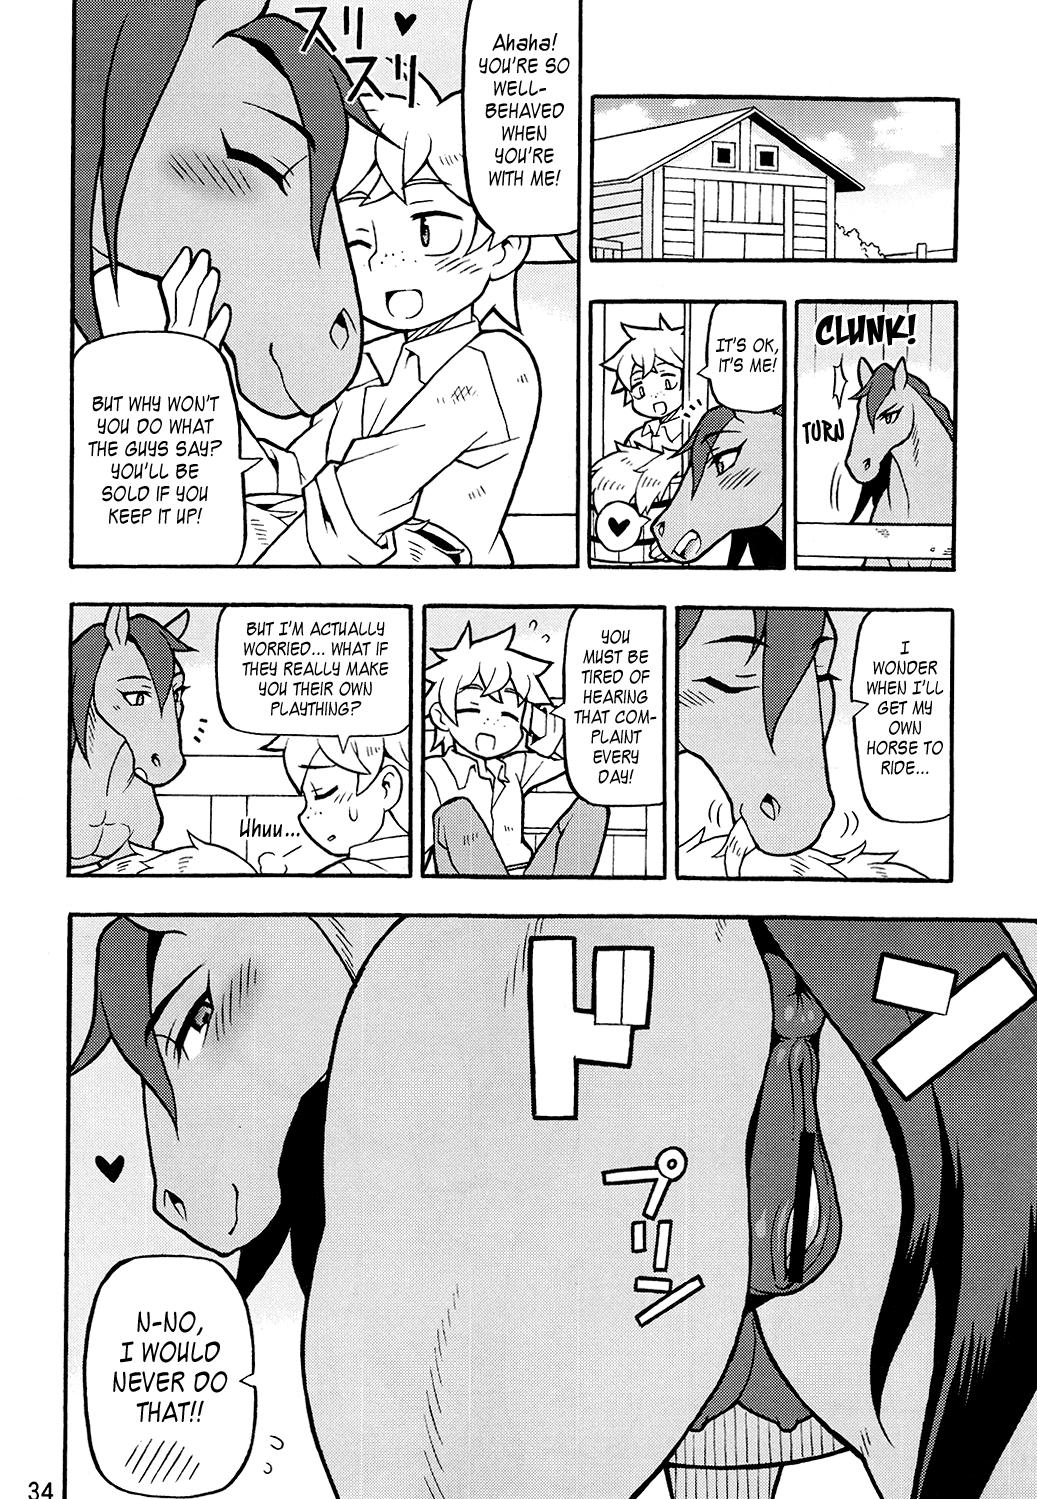 Orgasmo Mare Holic 4 Kemolover EX Ch. 4, 8, 10-11, 19, 29 Fucking - Page 4